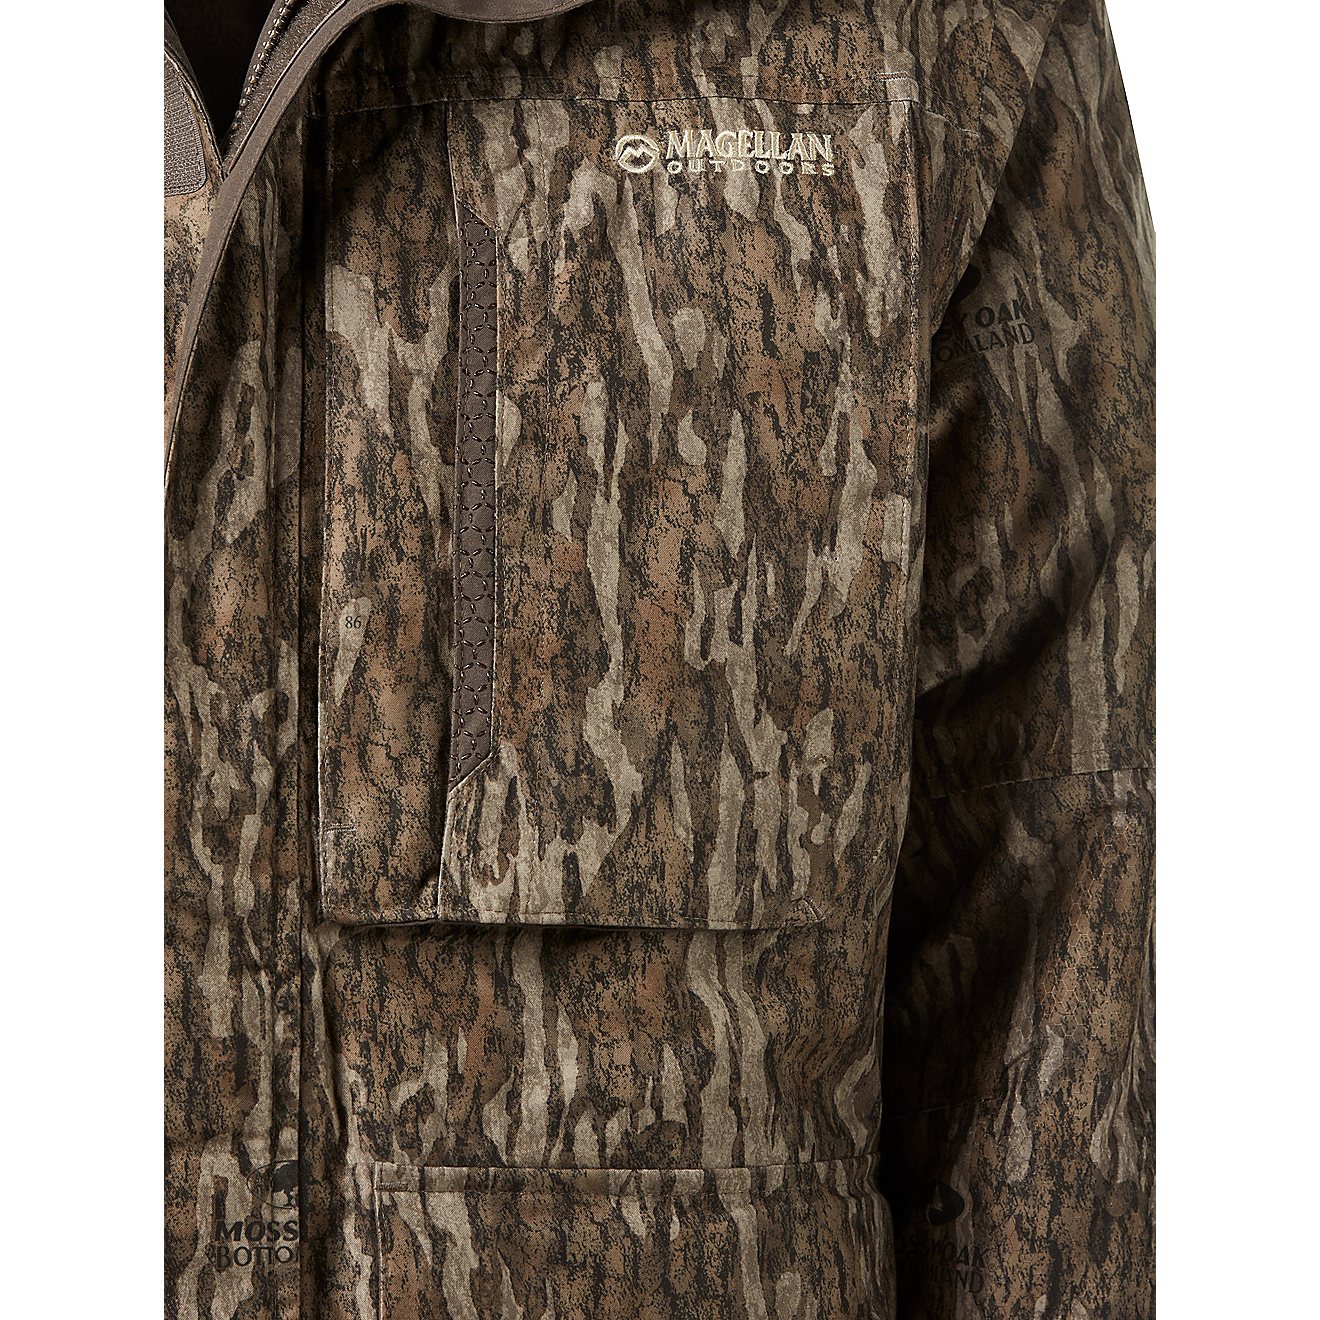 Magellan Outdoors Men's Pintail Waterfowl Insulated Jacket                                                                       - view number 3